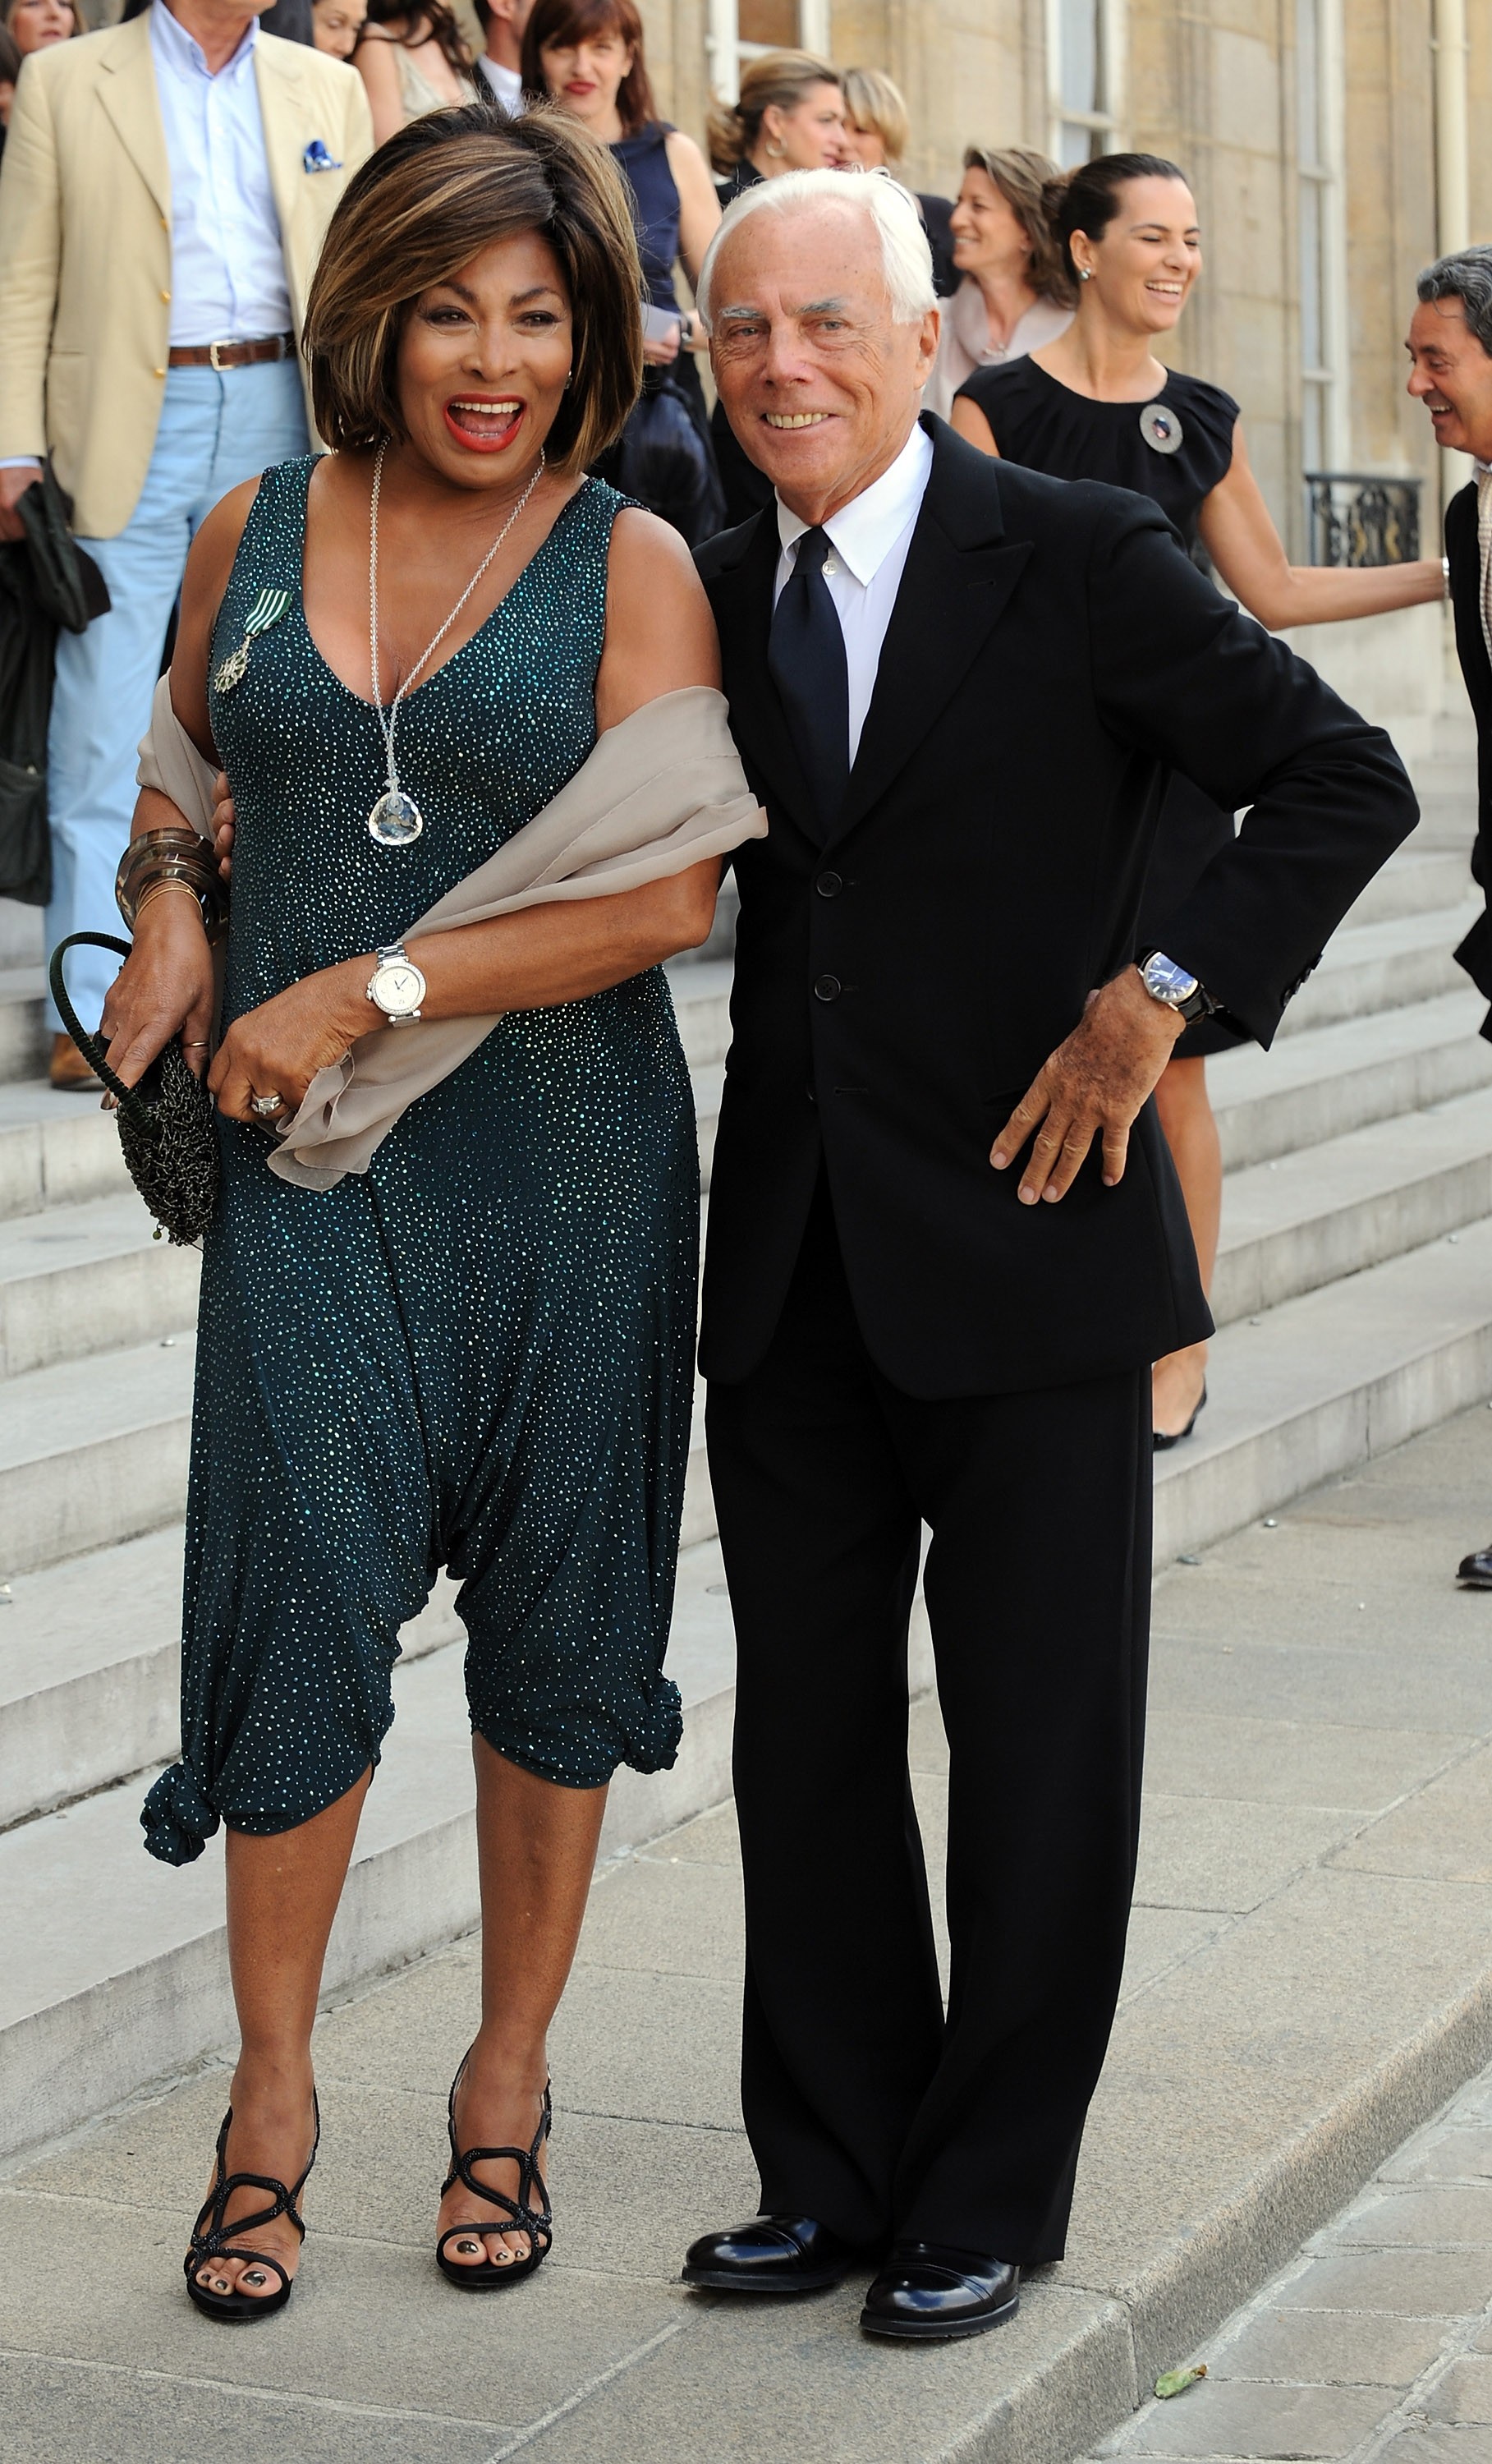 PARIS - JULY 03:  Italian fashion icon Giorgio Armani (R) poses with Singer Tina Turner (L) in the courtyard of the Elysee Palace before attending a ceremony at the president's official residence for honorees of France's most prestigious Legion D'Honneur  (Foto: WireImage)